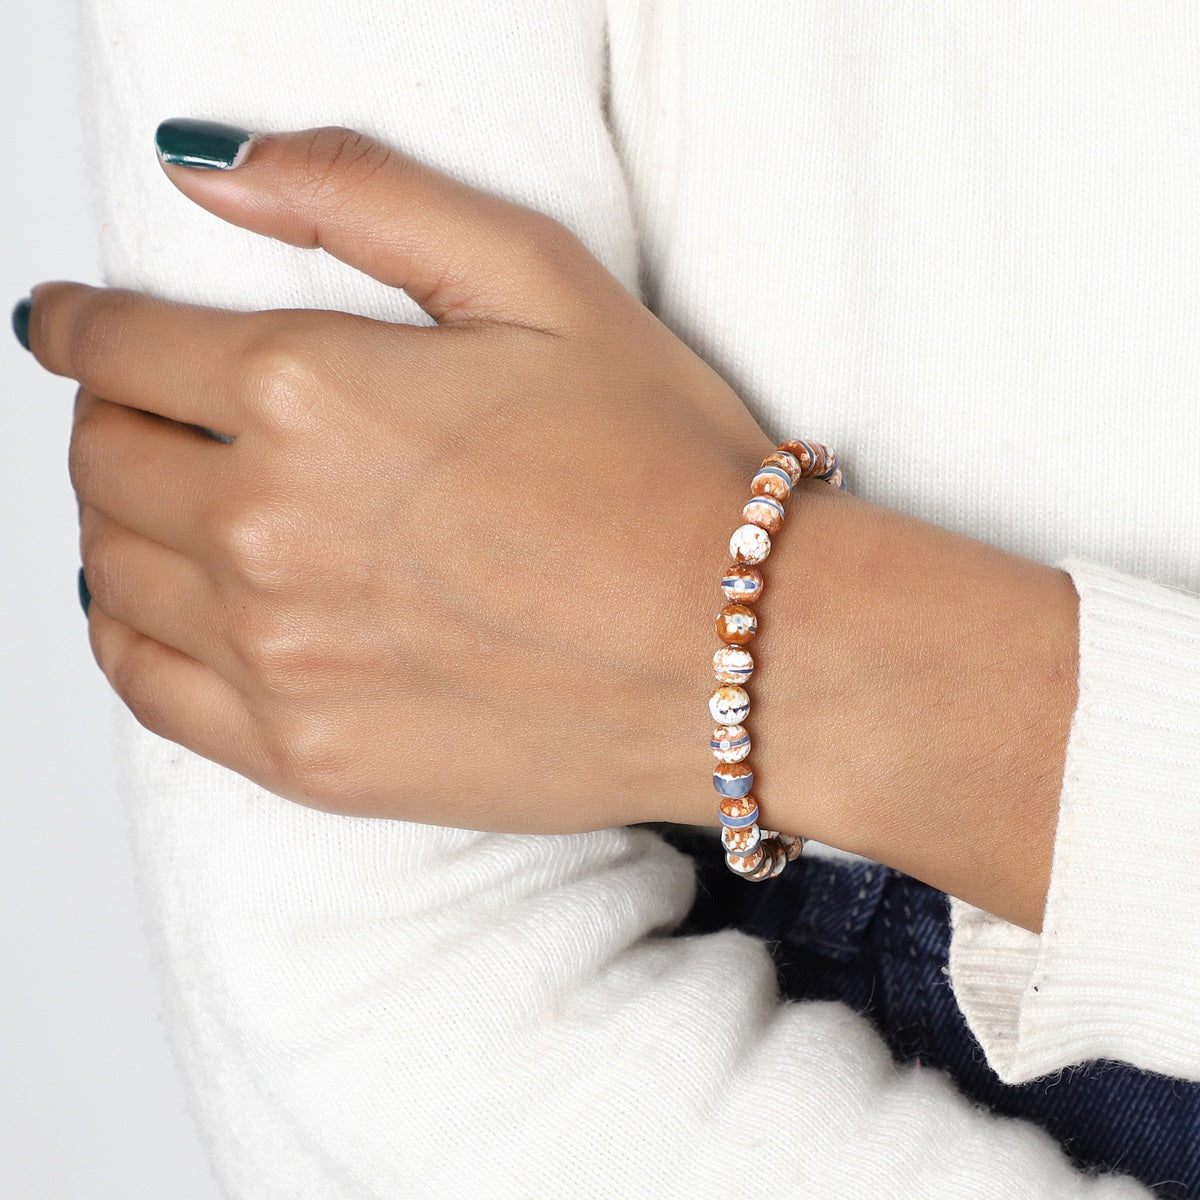 A lifestyle image featuring the Tibetan Agate Stretch Bracelet being worn, demonstrating its seamless integration into everyday fashion with a touch of spirituality